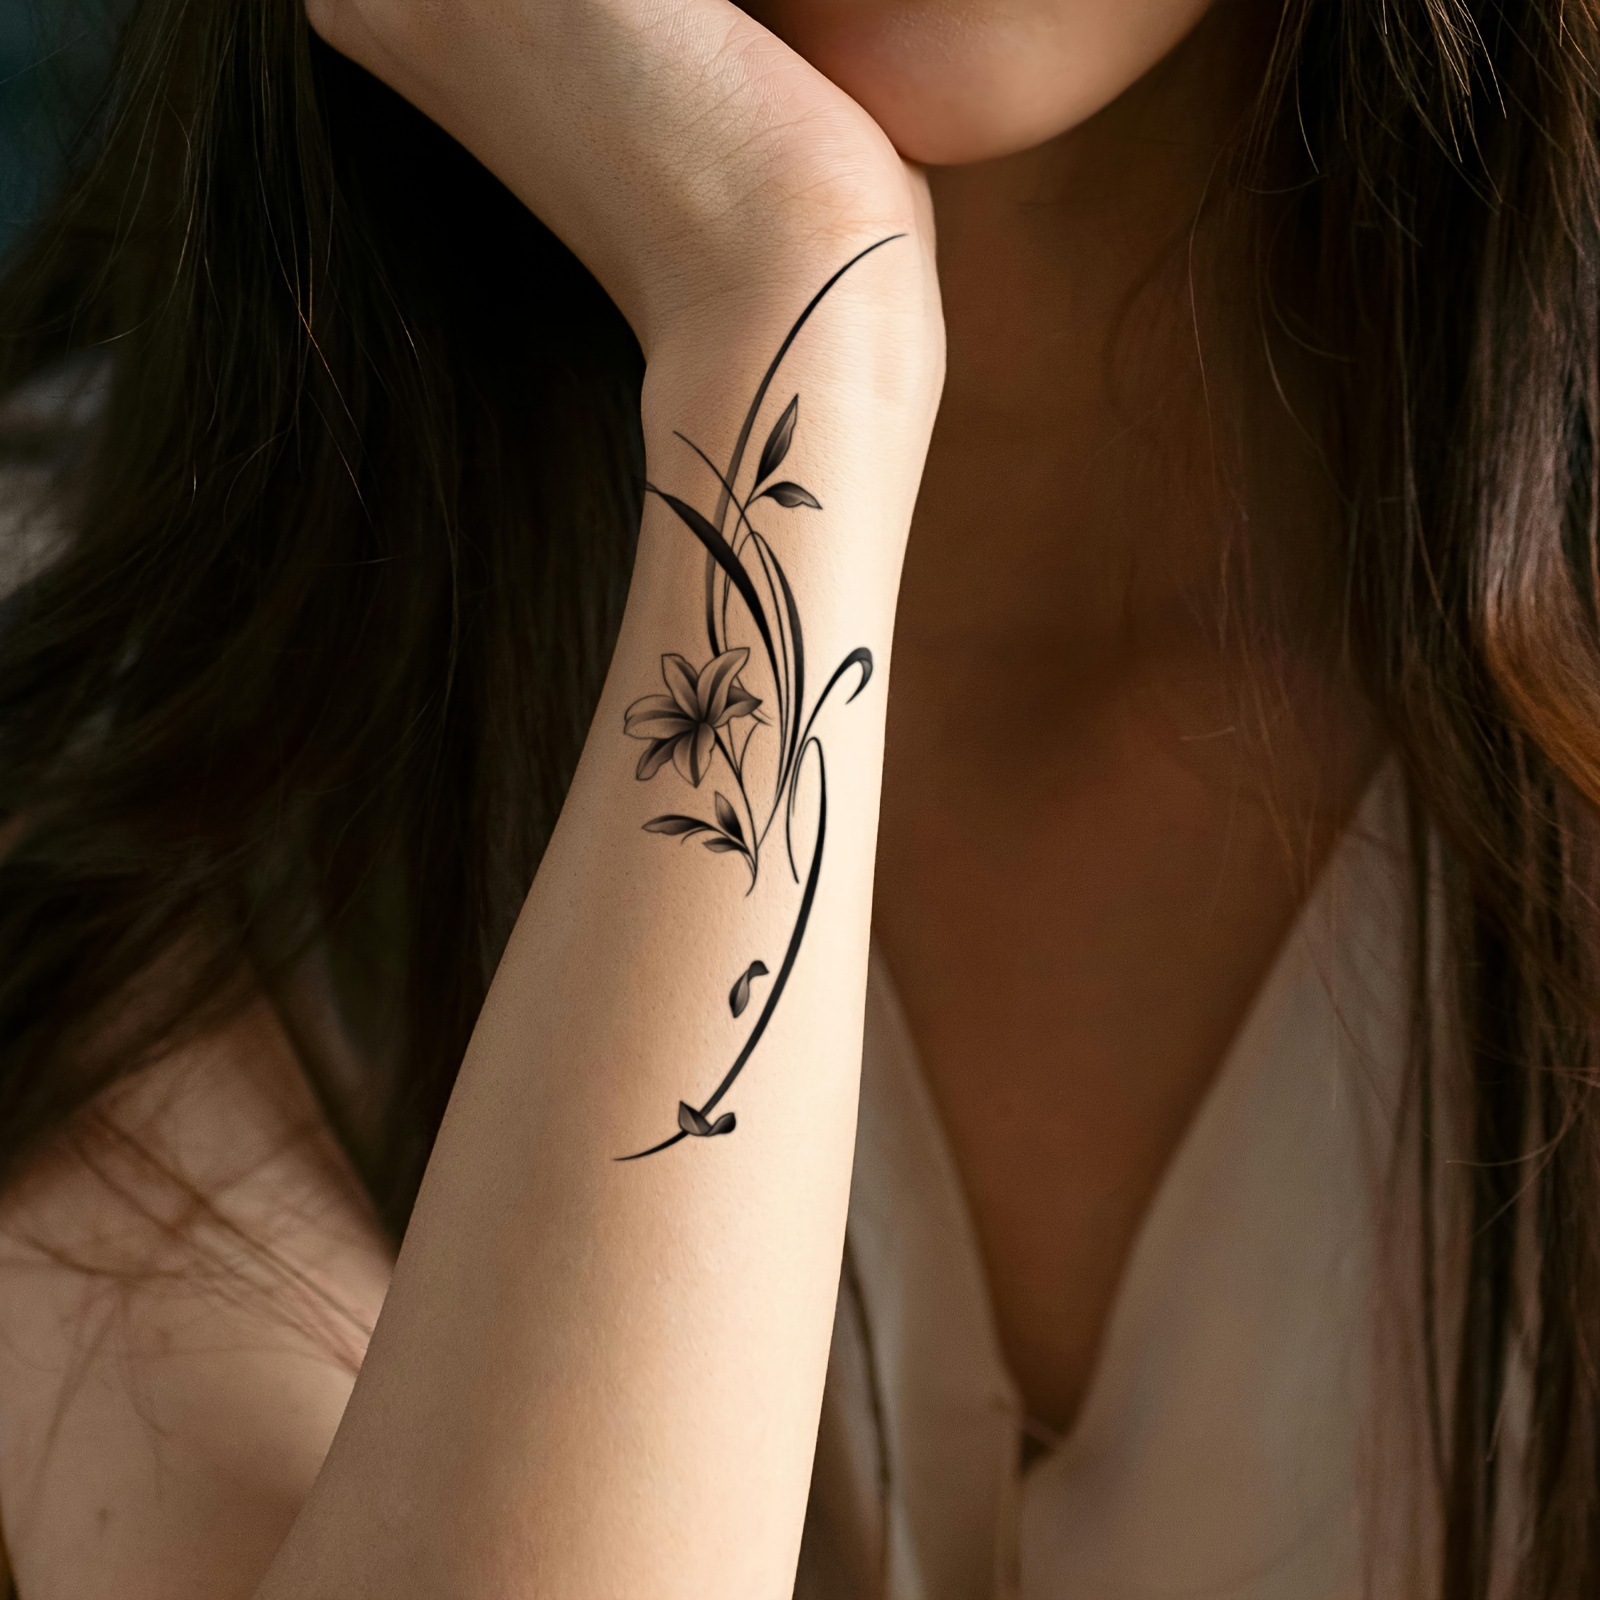 

Chic Minimalist Artistic Orchid Temporary Tattoo Decal, Rectangular Shape, Lasts 1-3 Days - Makeup Category